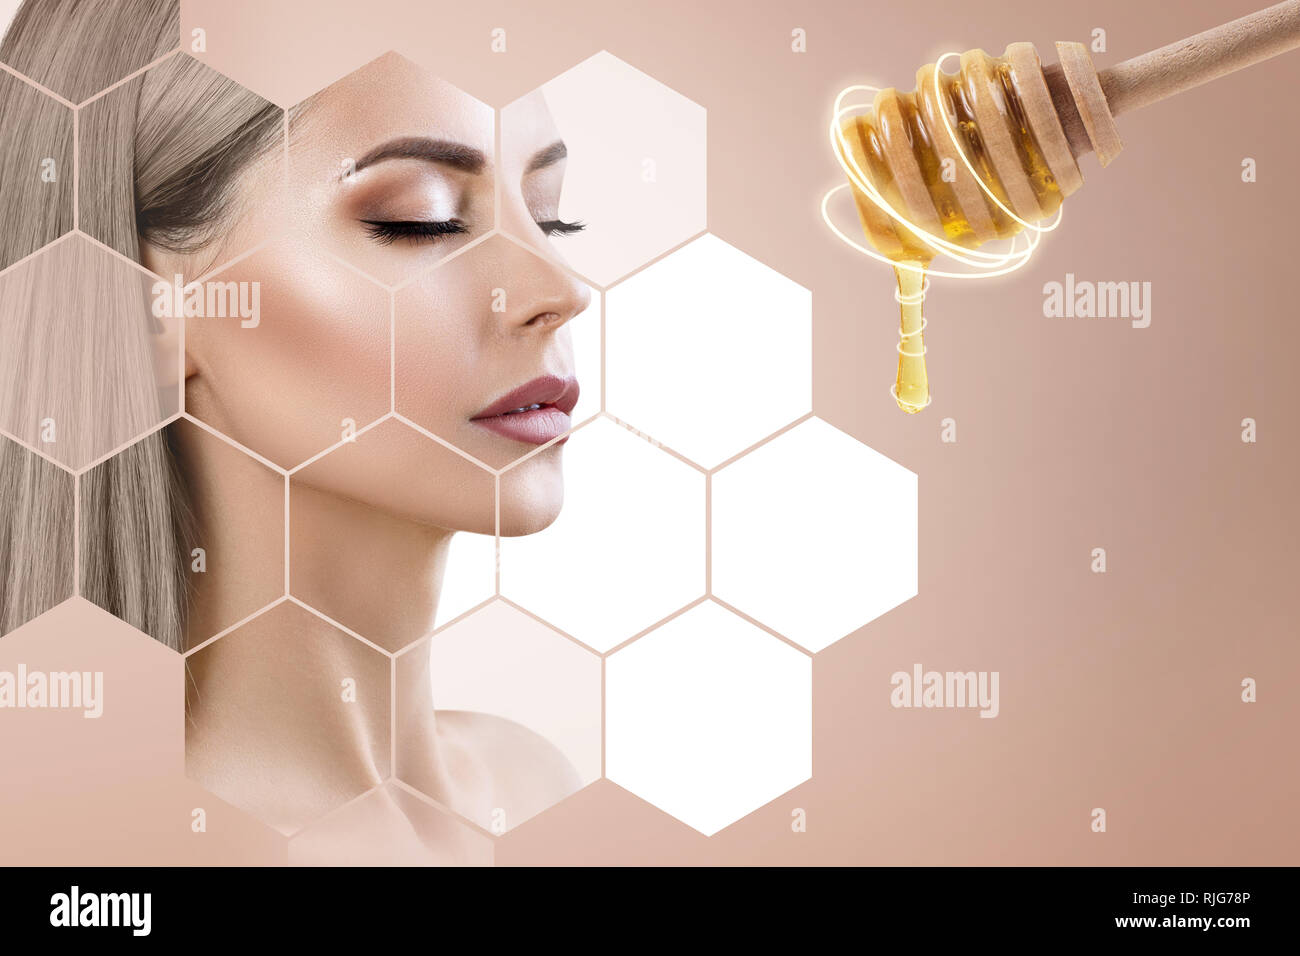 Young woman and honey spoon prepare for facial mask. Stock Photo